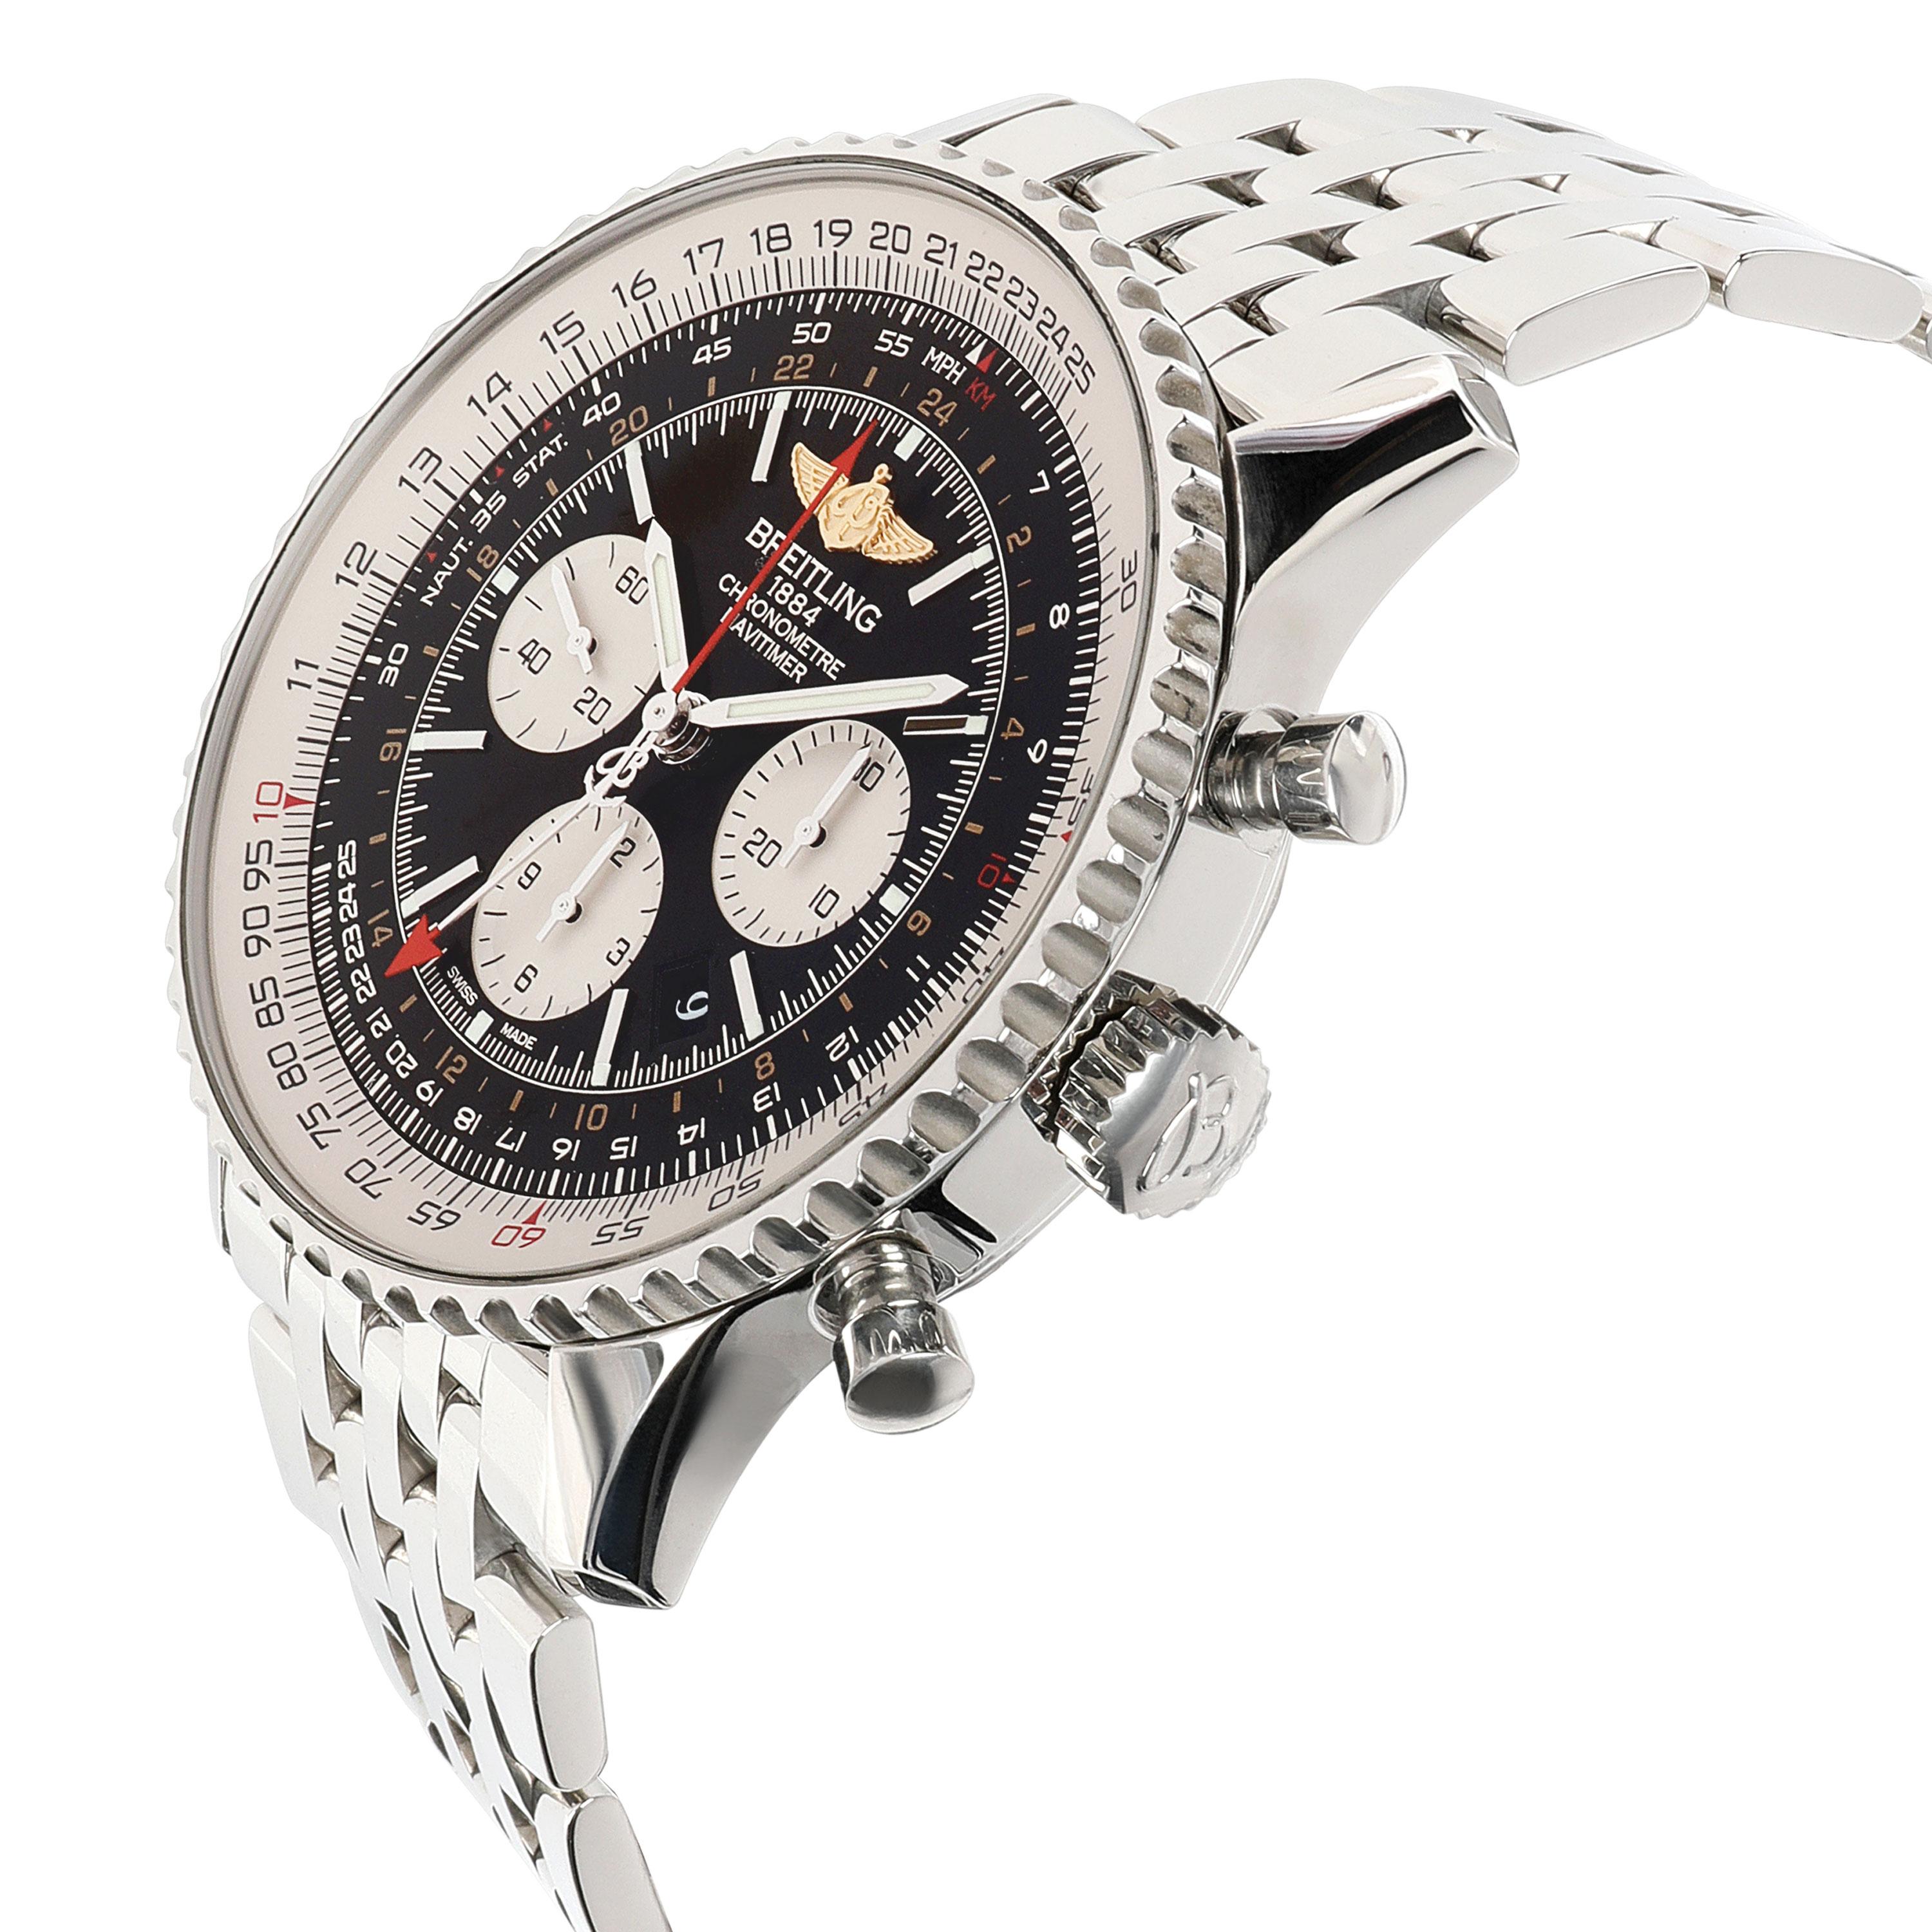 Breitling Navitimer GMT AB044121/BD24 Men's Watch in Stainless Steel 1